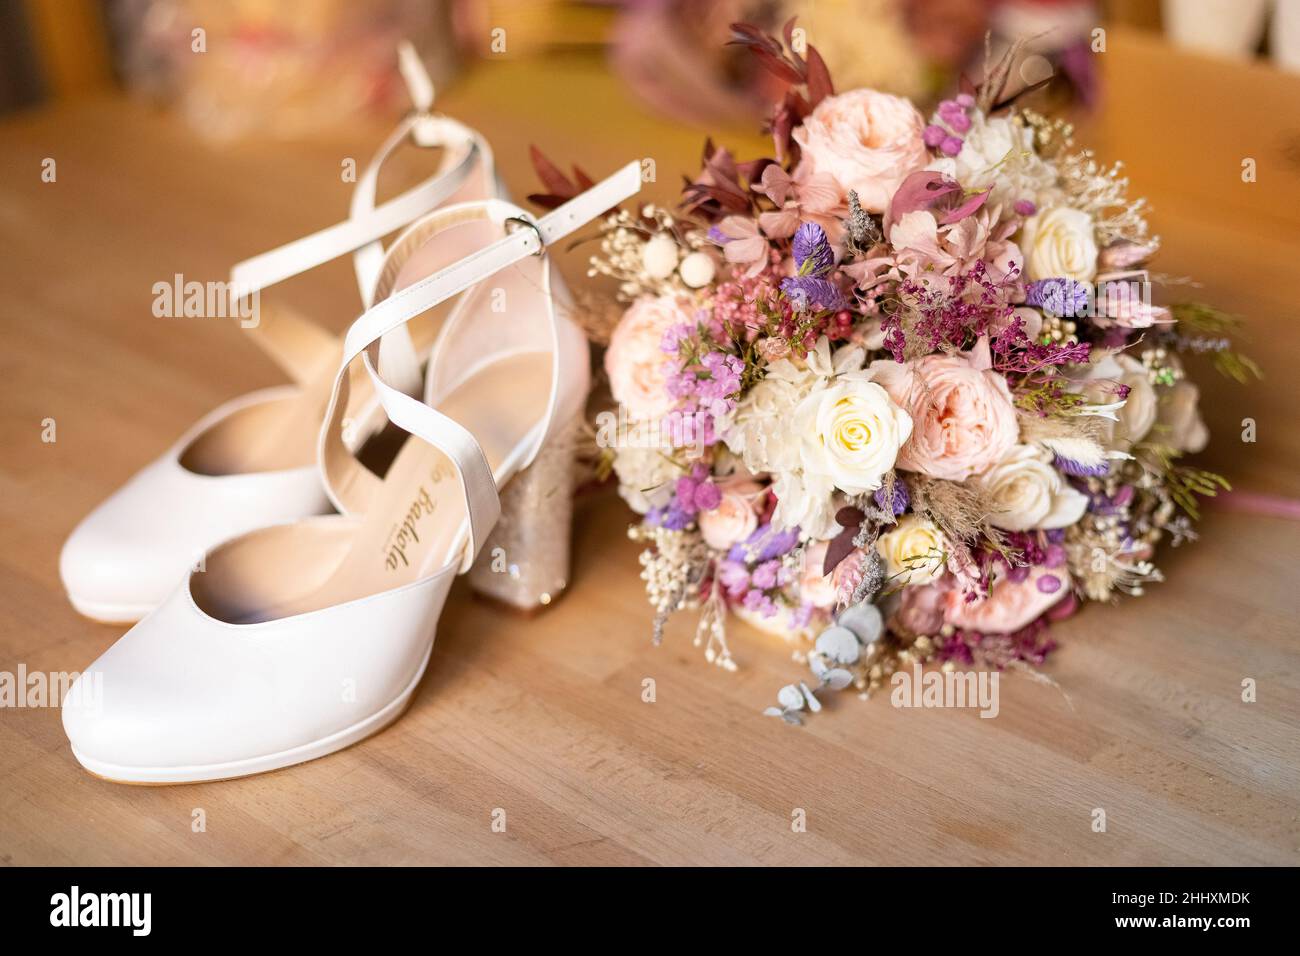 The bridal shoes with a wedding bouquet on the floor Stock Photo